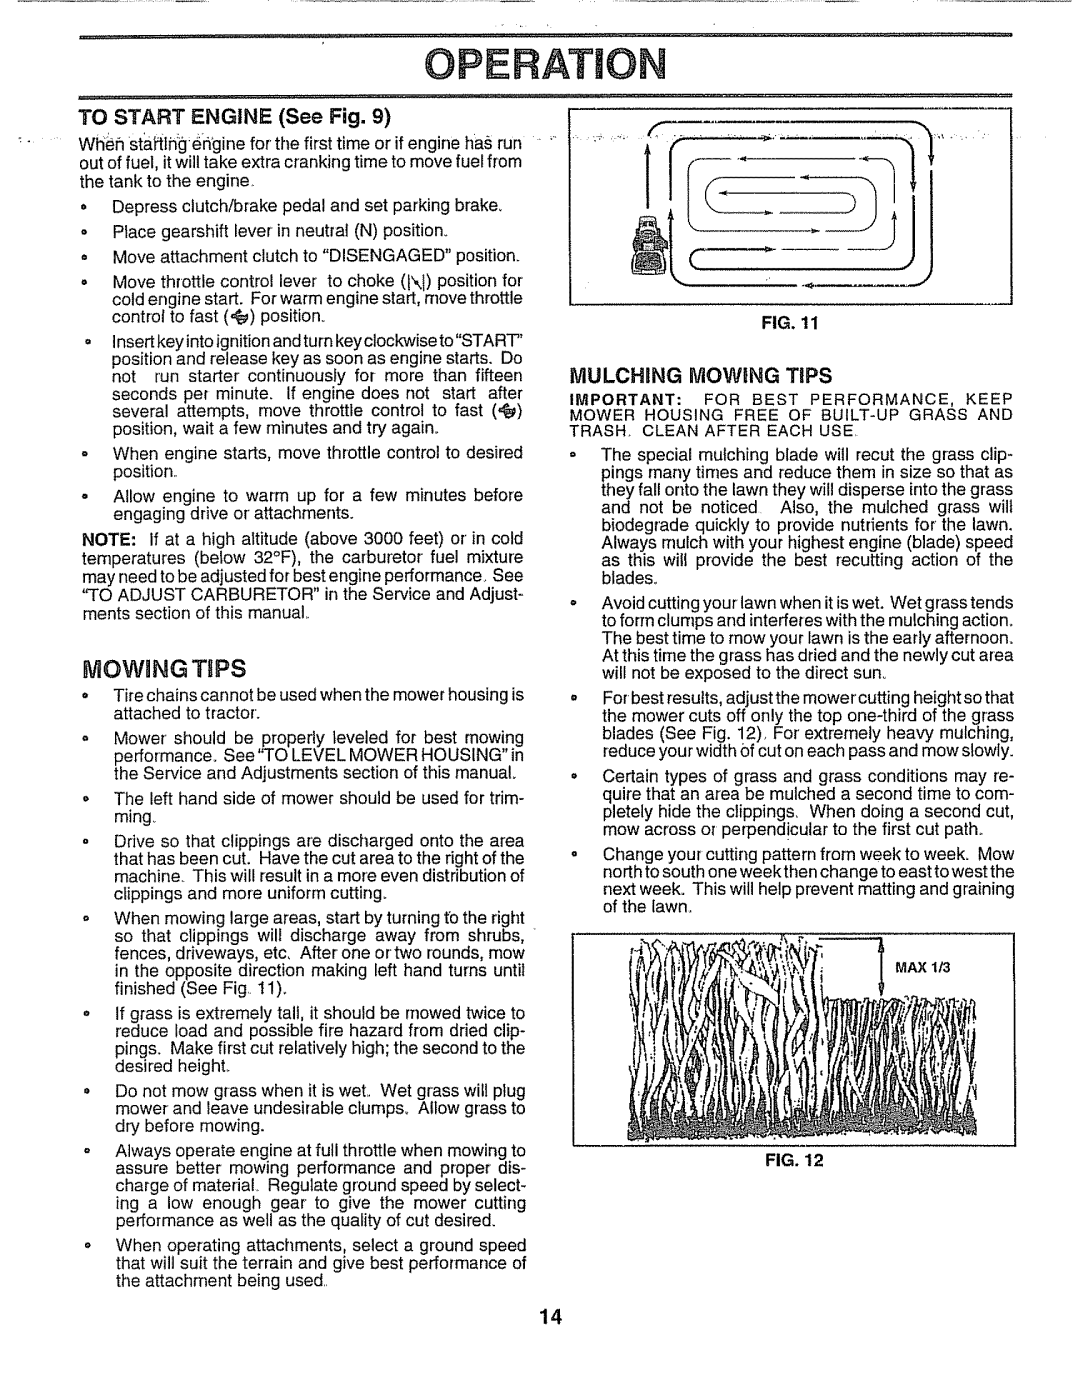 Sears 917.257552 manual Operat|O, Mowungtips, TO START ENGINE See Fig, MULCHING MOWING TiPS 